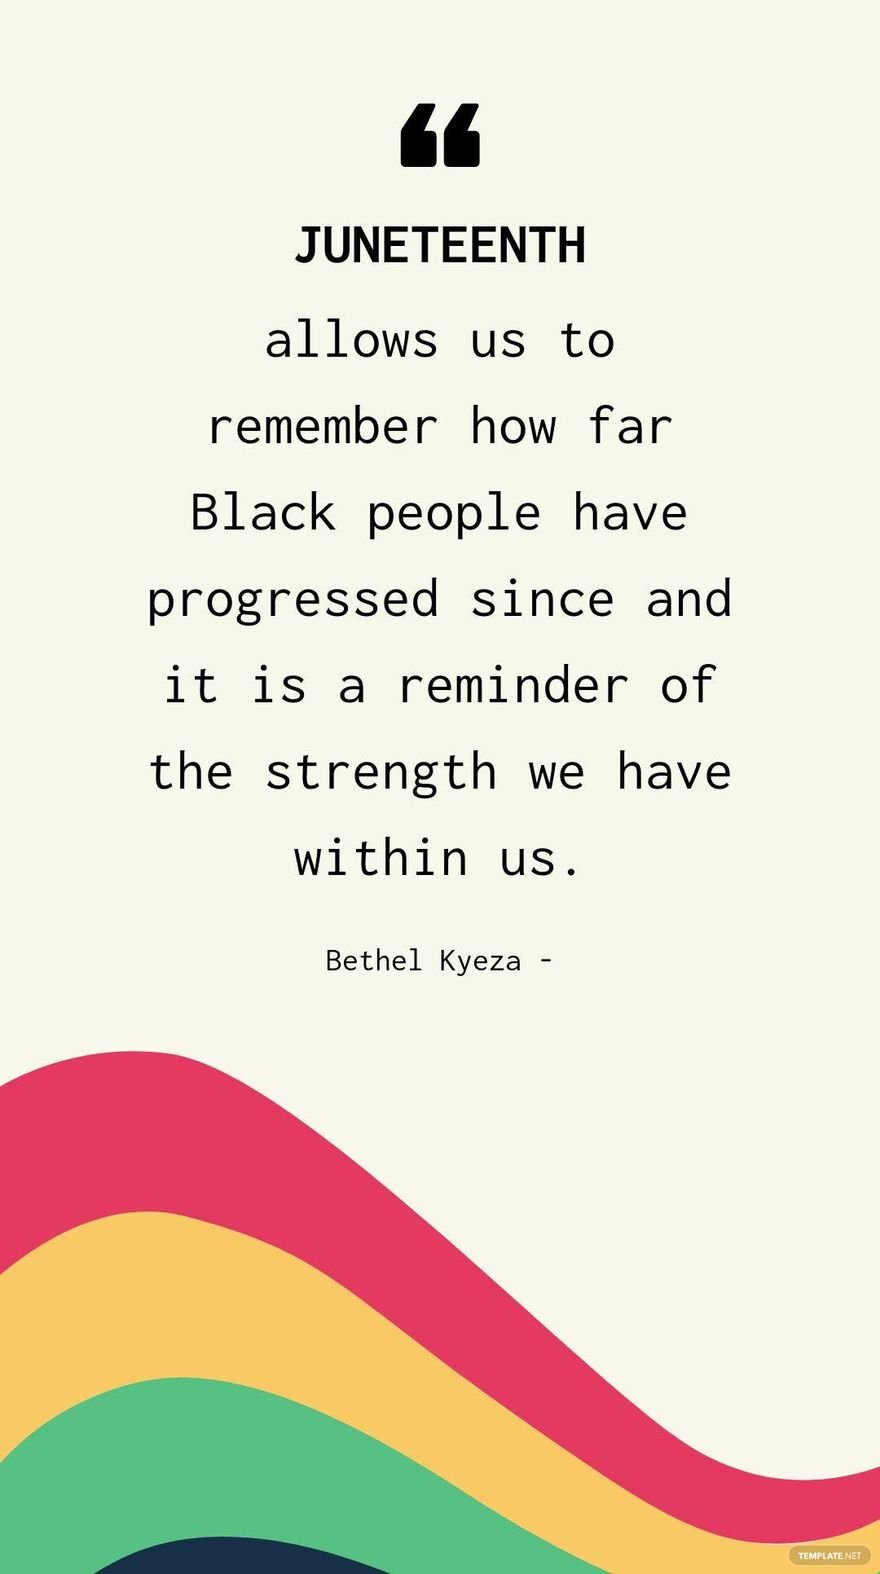 Bethel Kyeza - Juneteenth allows us to remember how far Black people have progressed since and it is a reminder of the strength we have within us.